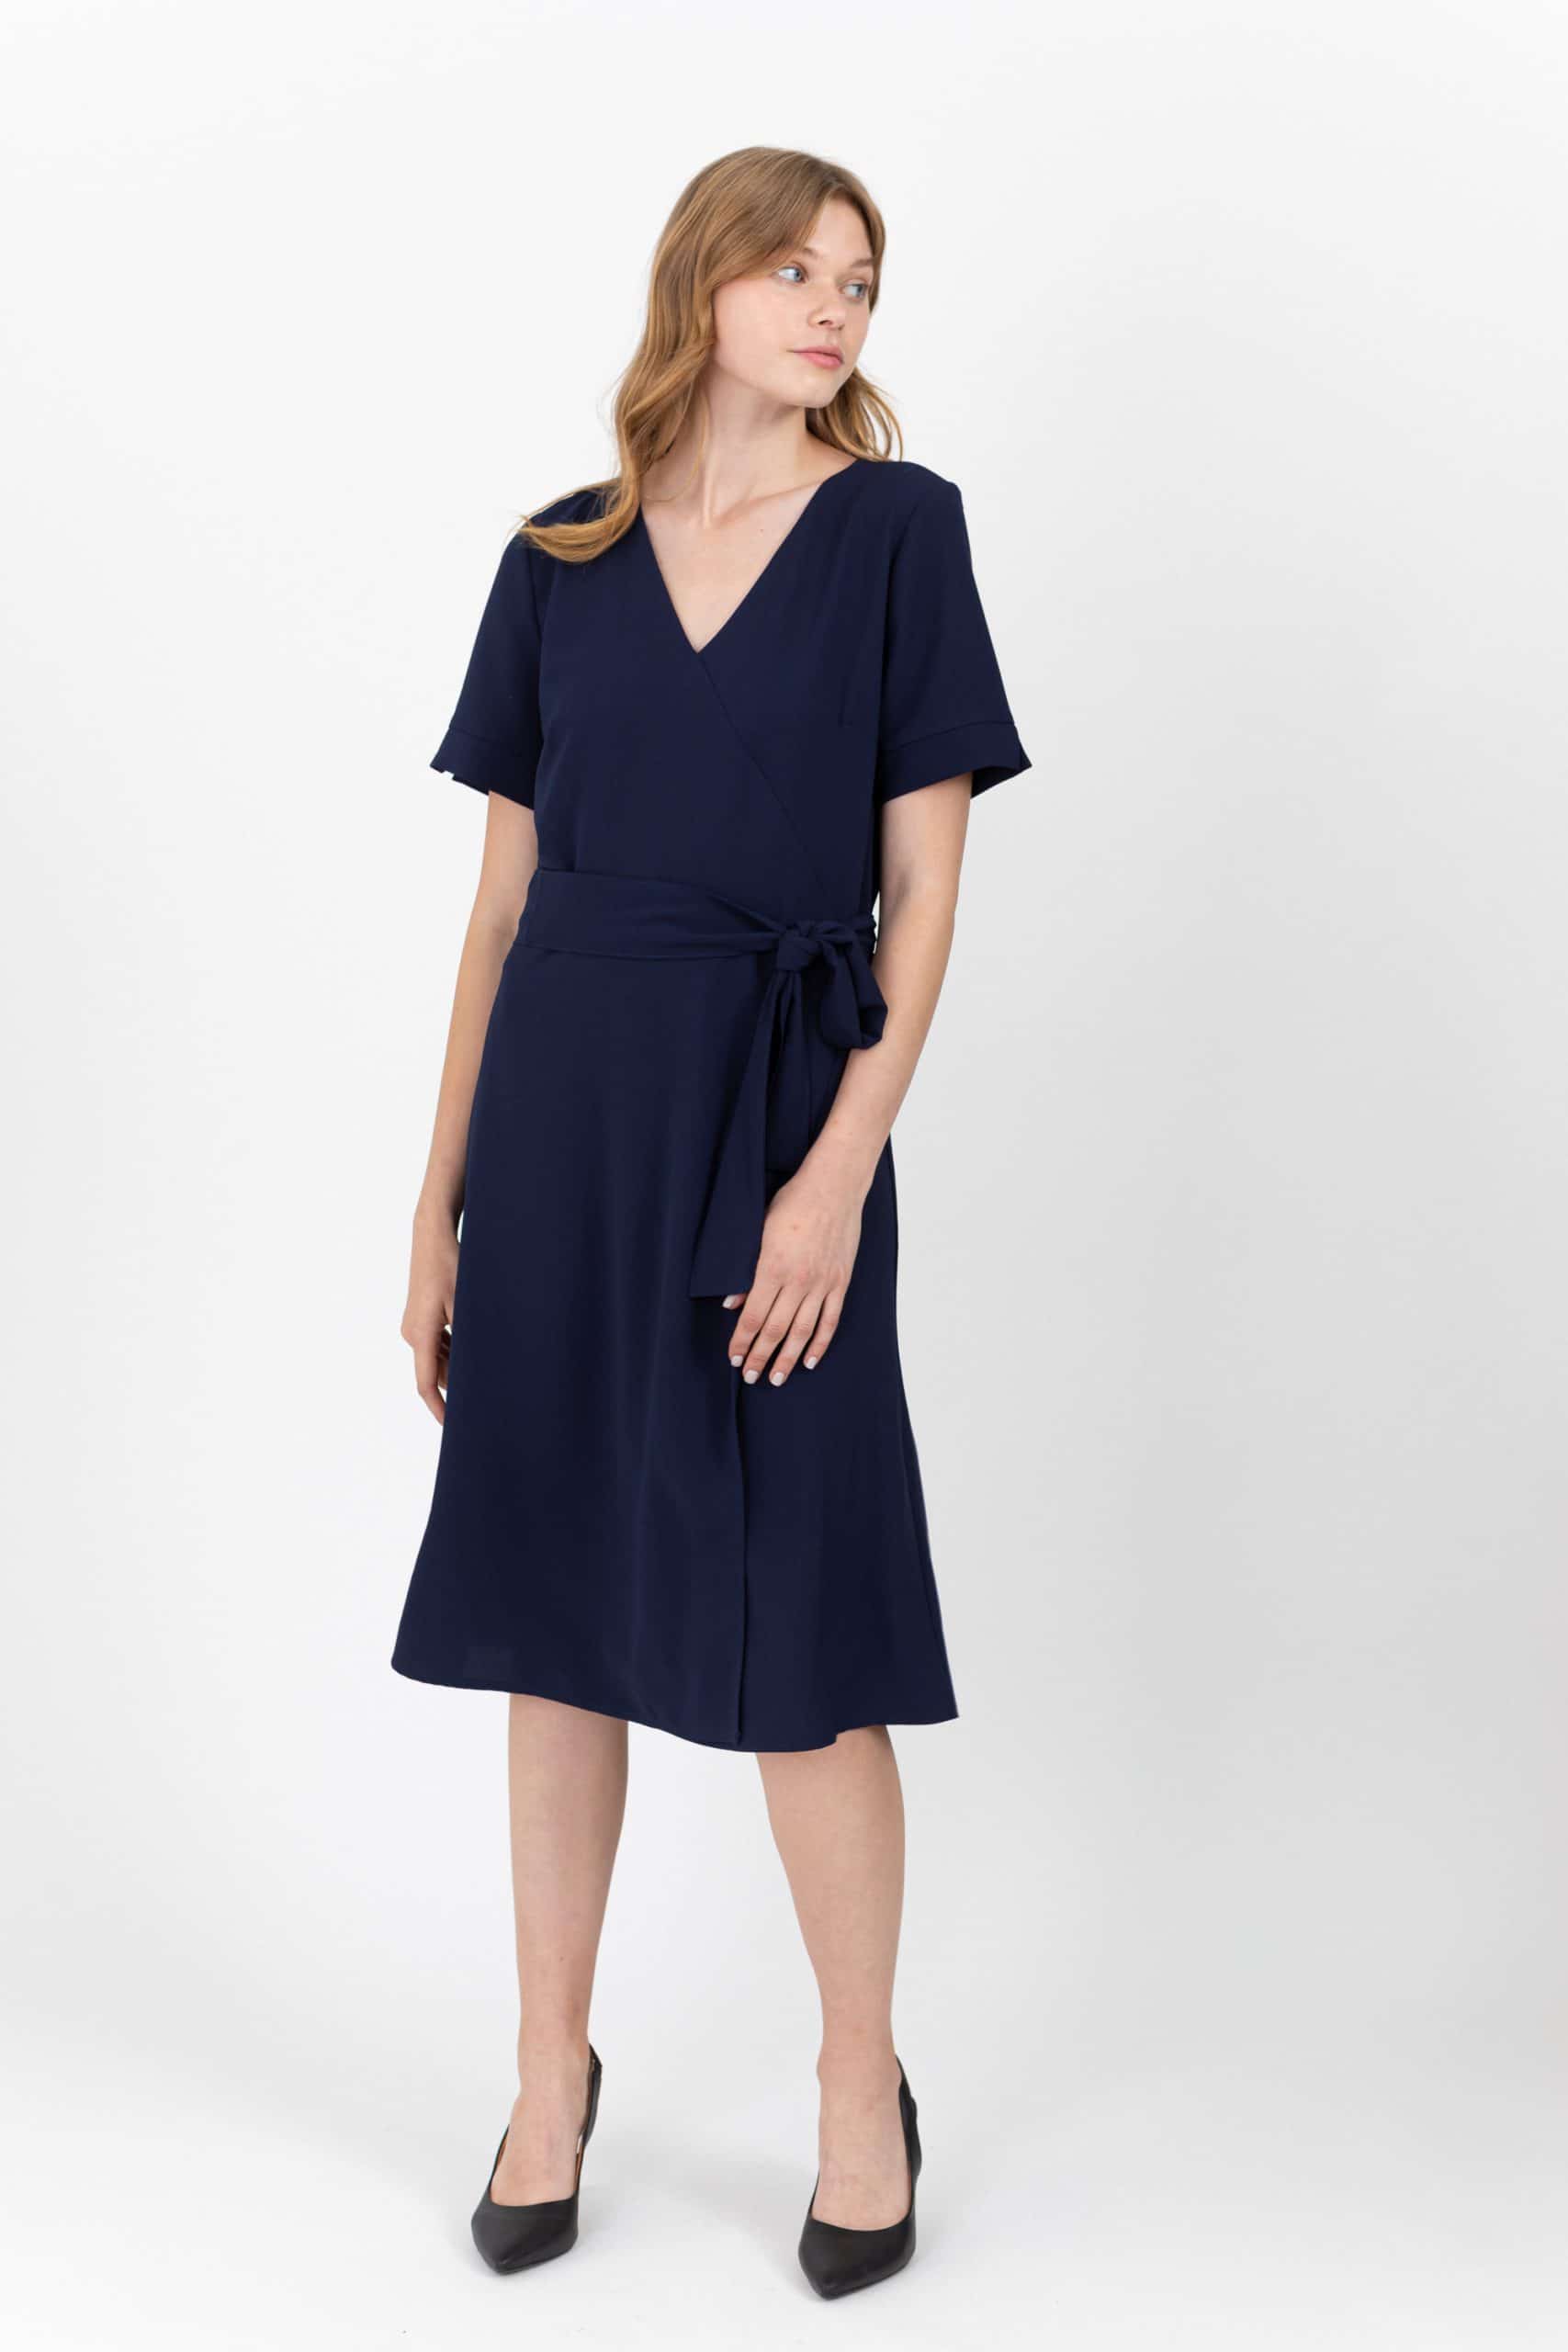 Modest summer dress with faux wrap .V neck, short sleeve.